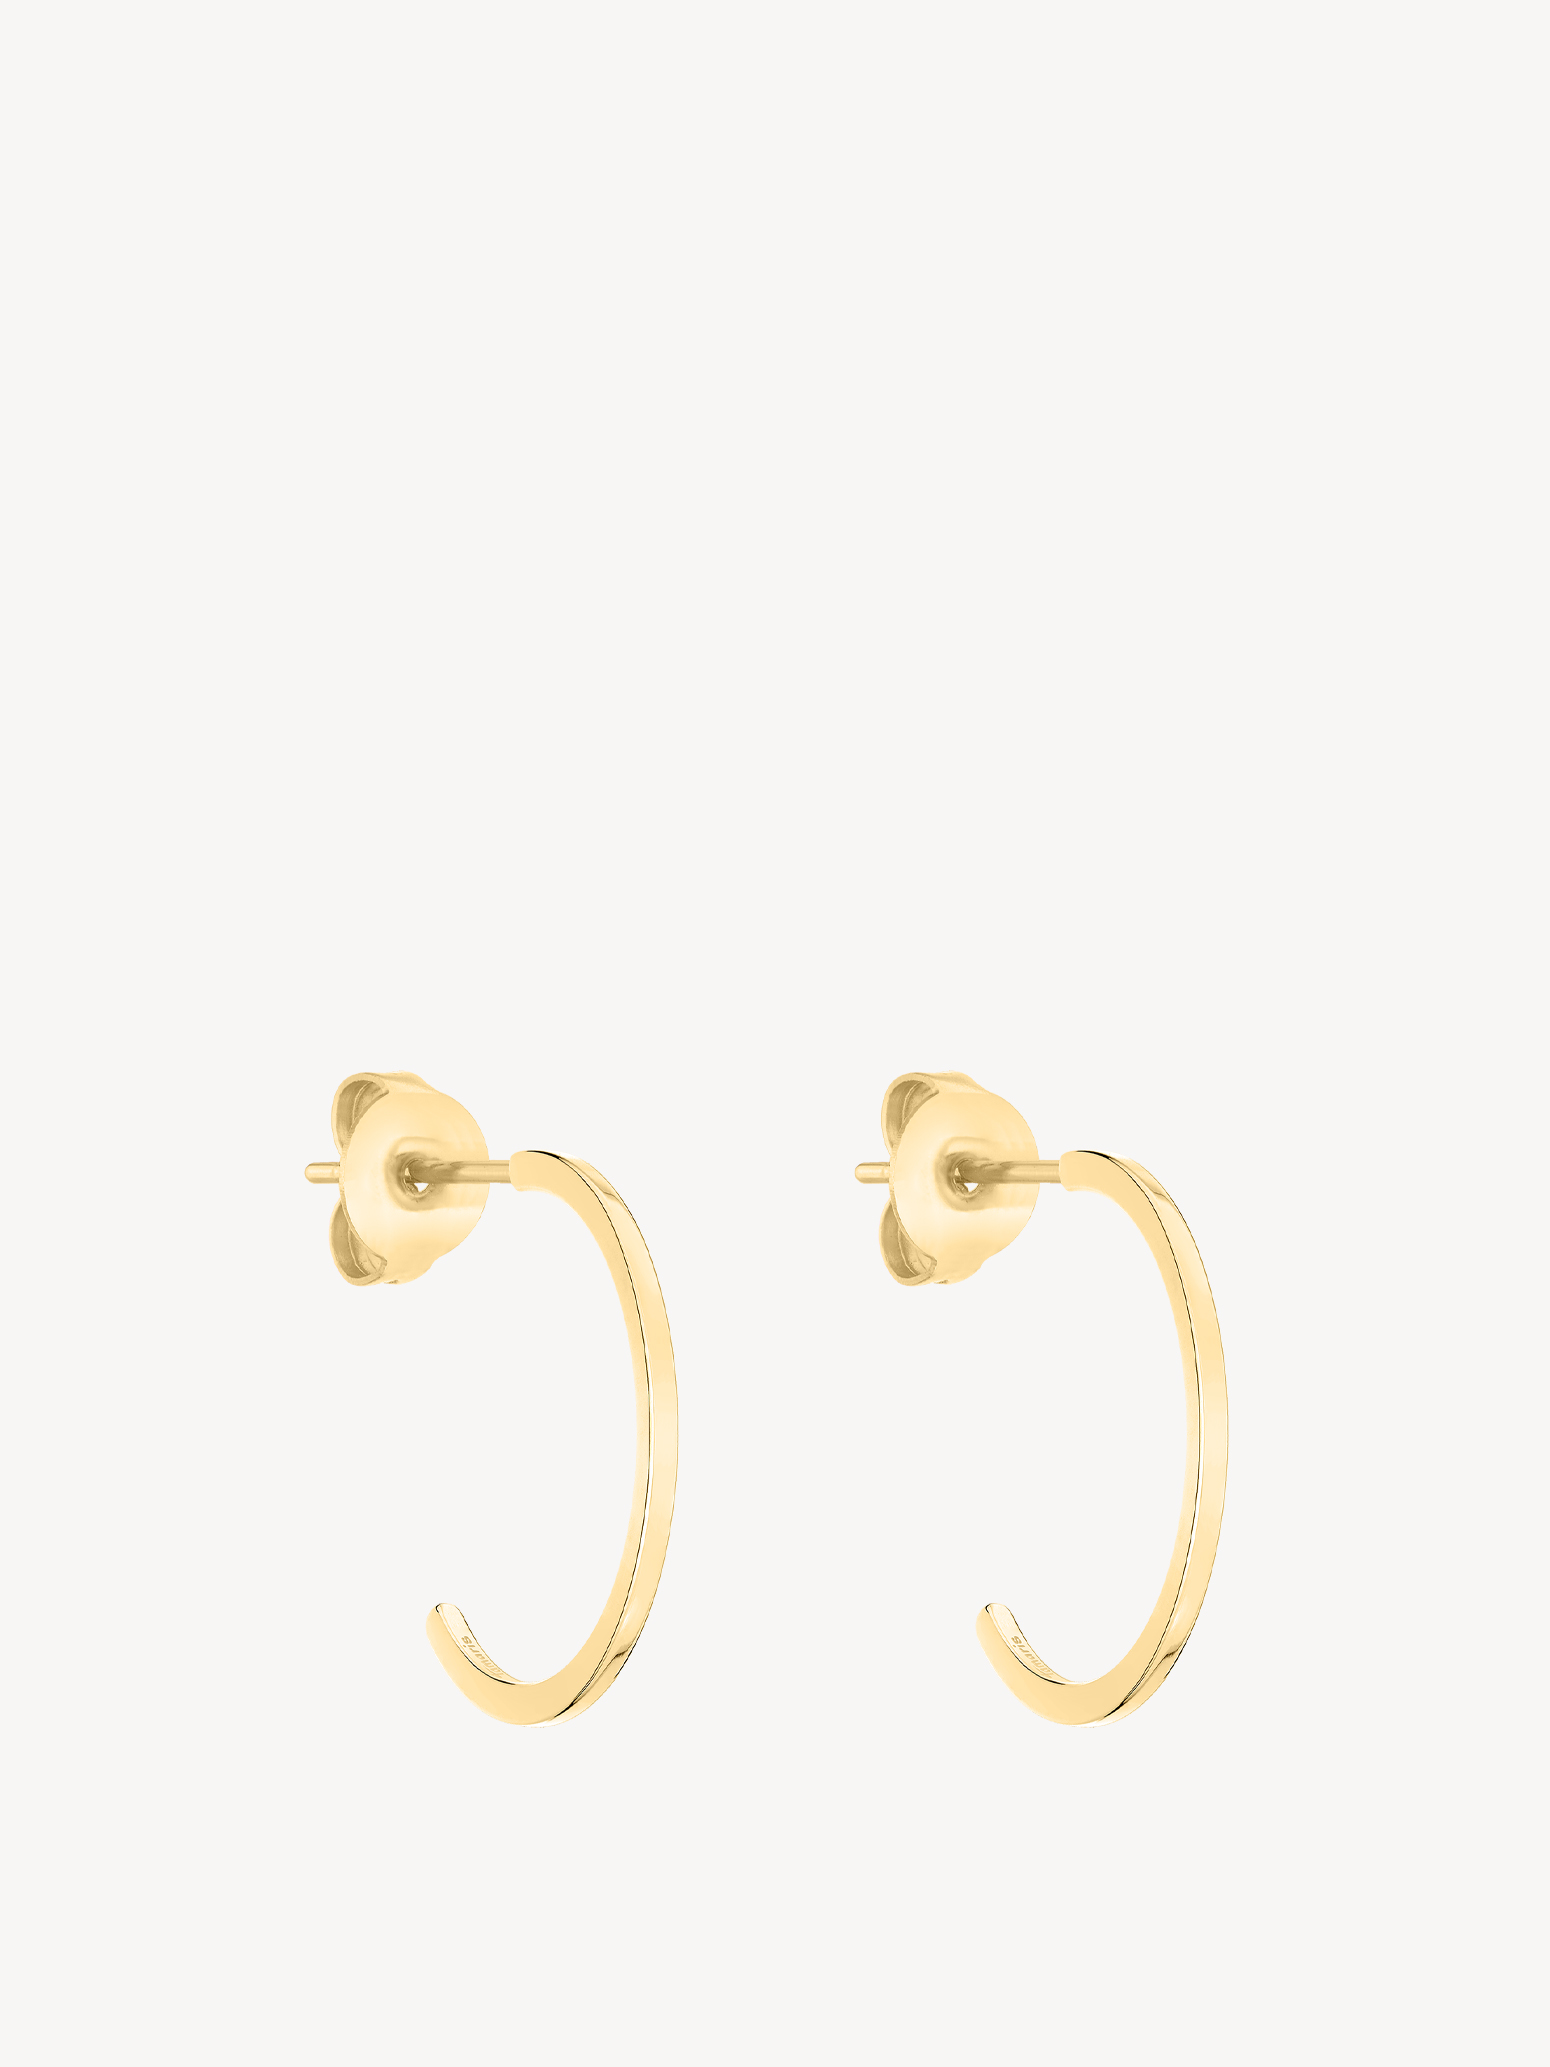 ﻿Creole earring - gold